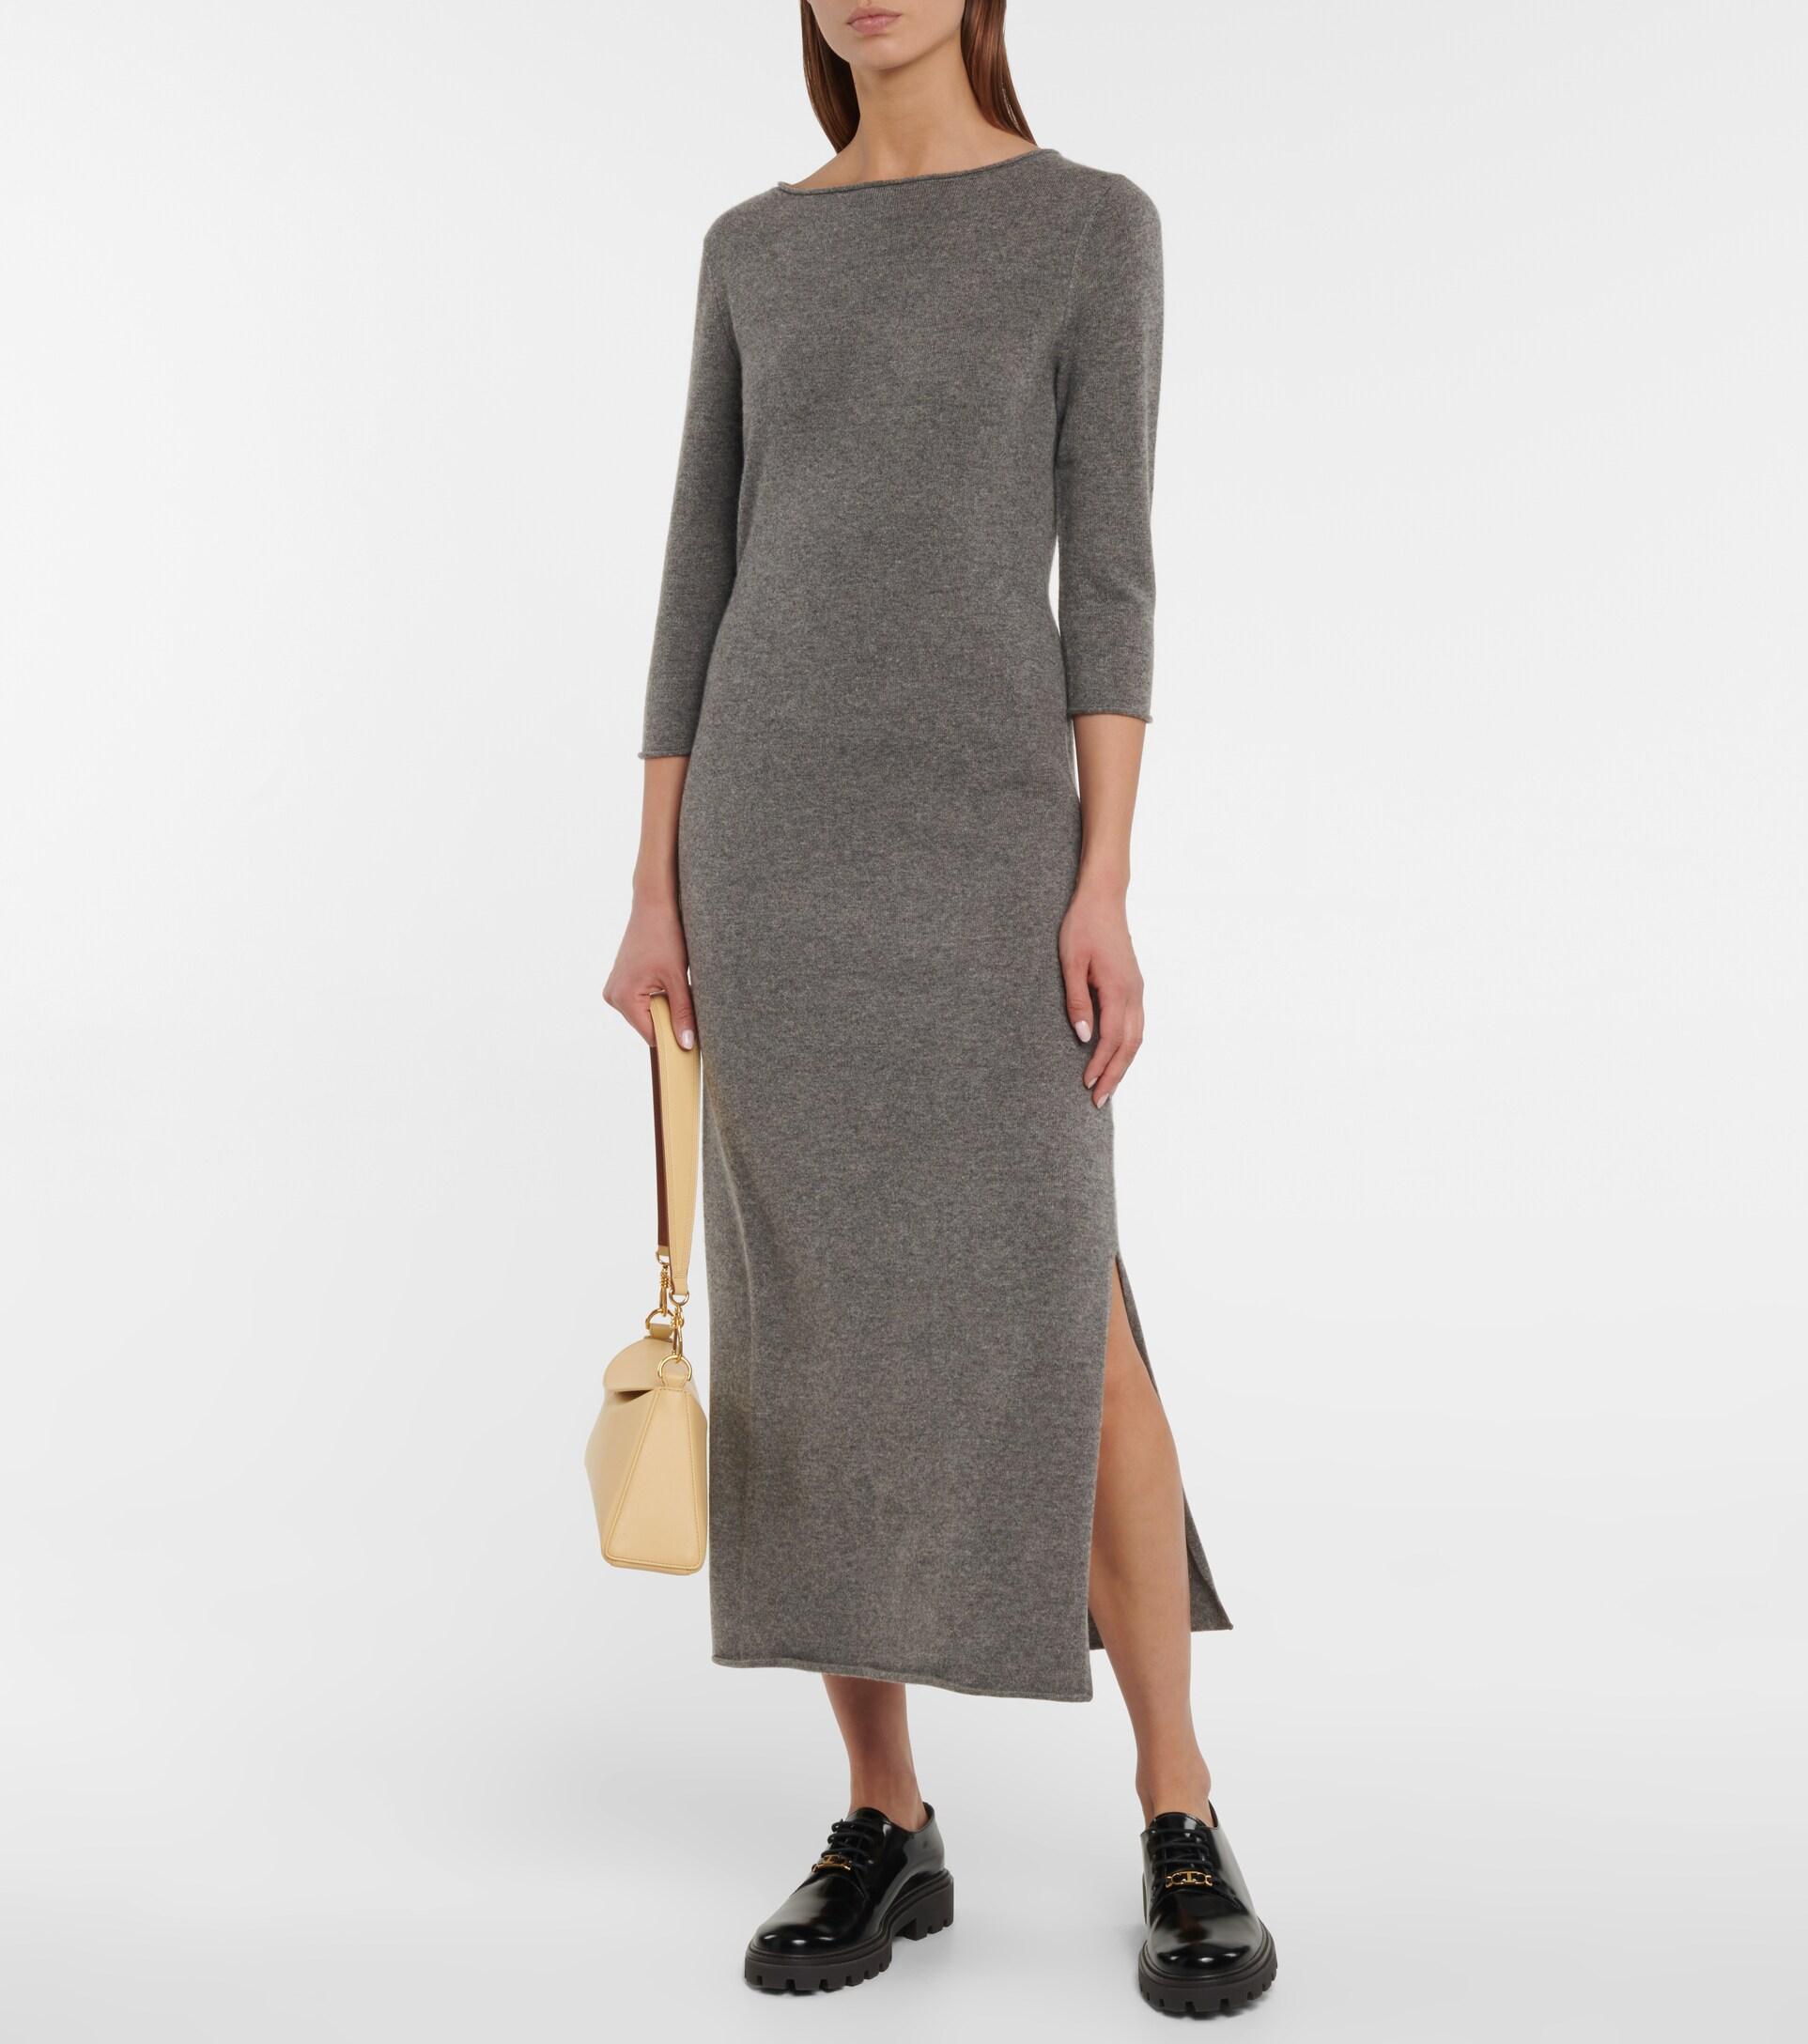 Polo Ralph Lauren Cashmere Sweater Dress in Gray | Lyst